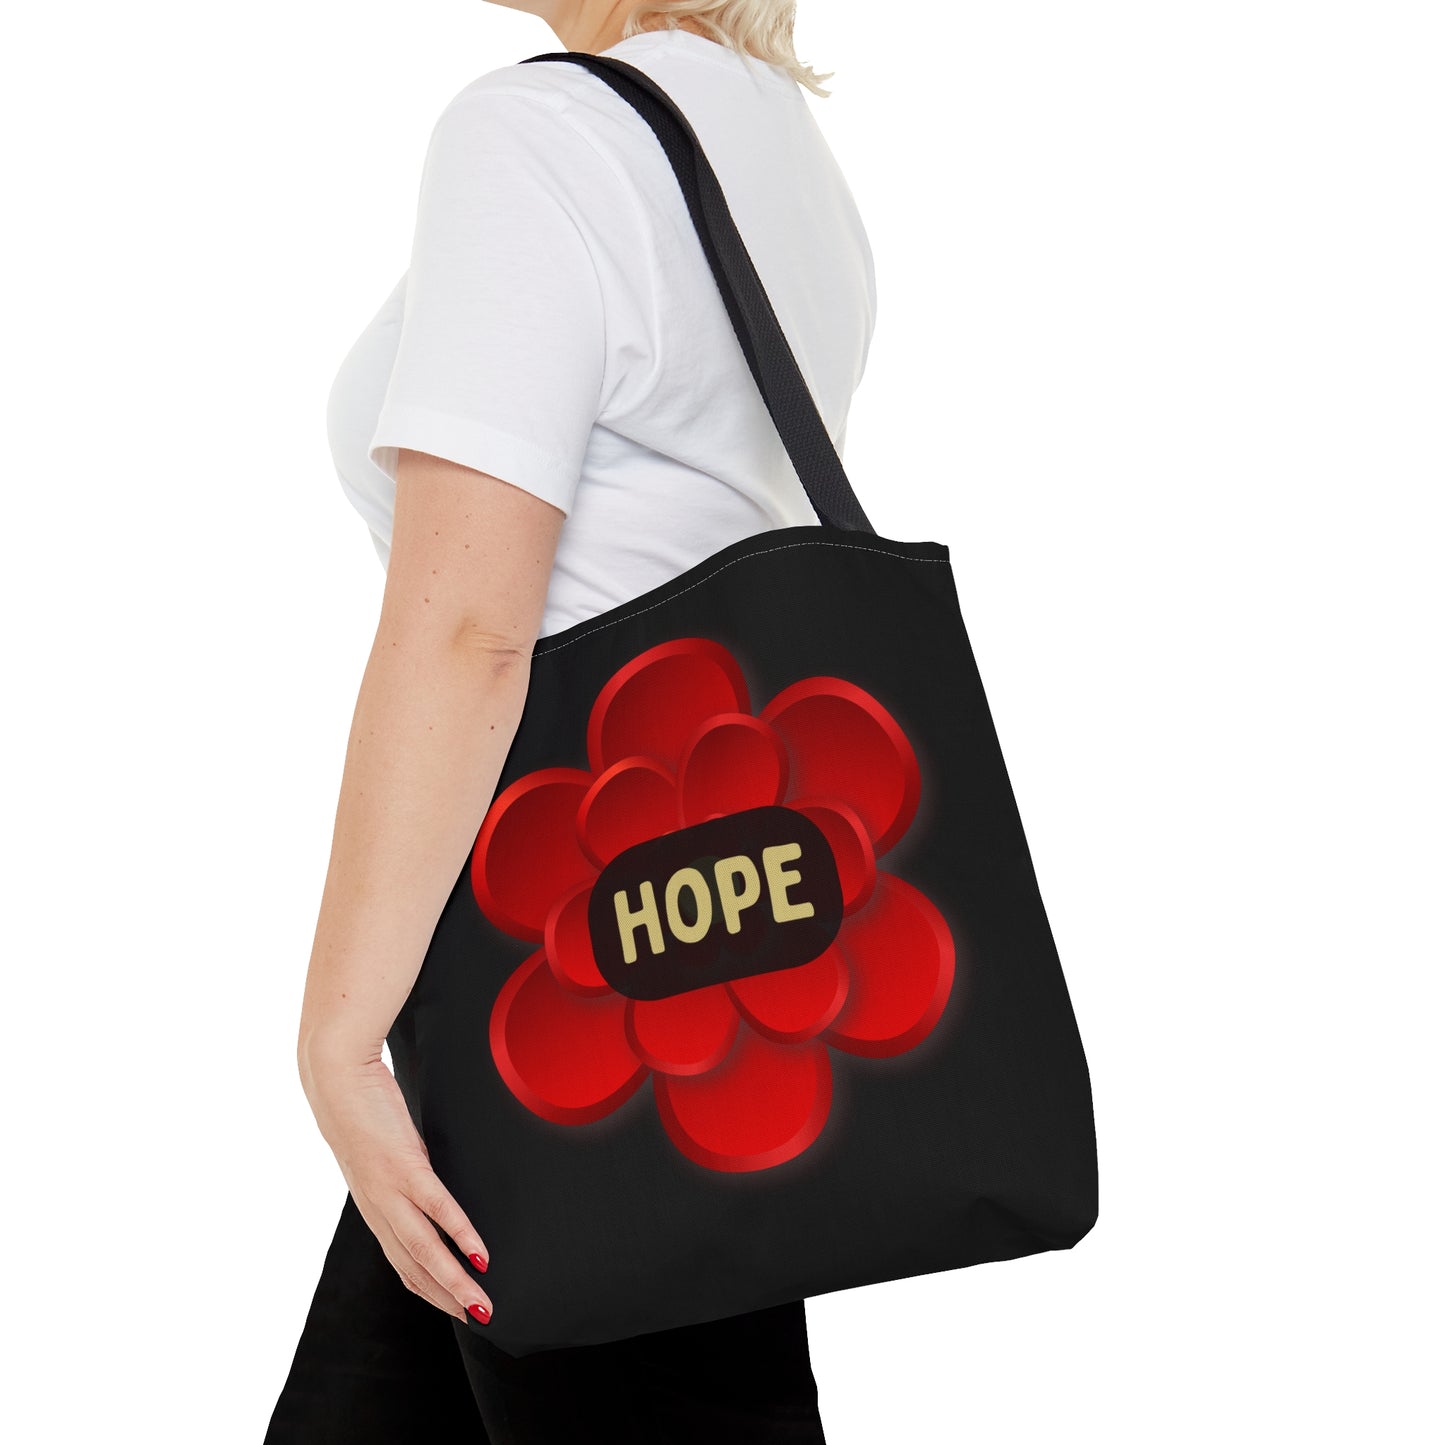 Vibrant “Hope" Tote Bag in 3 sizes to meet your needs.